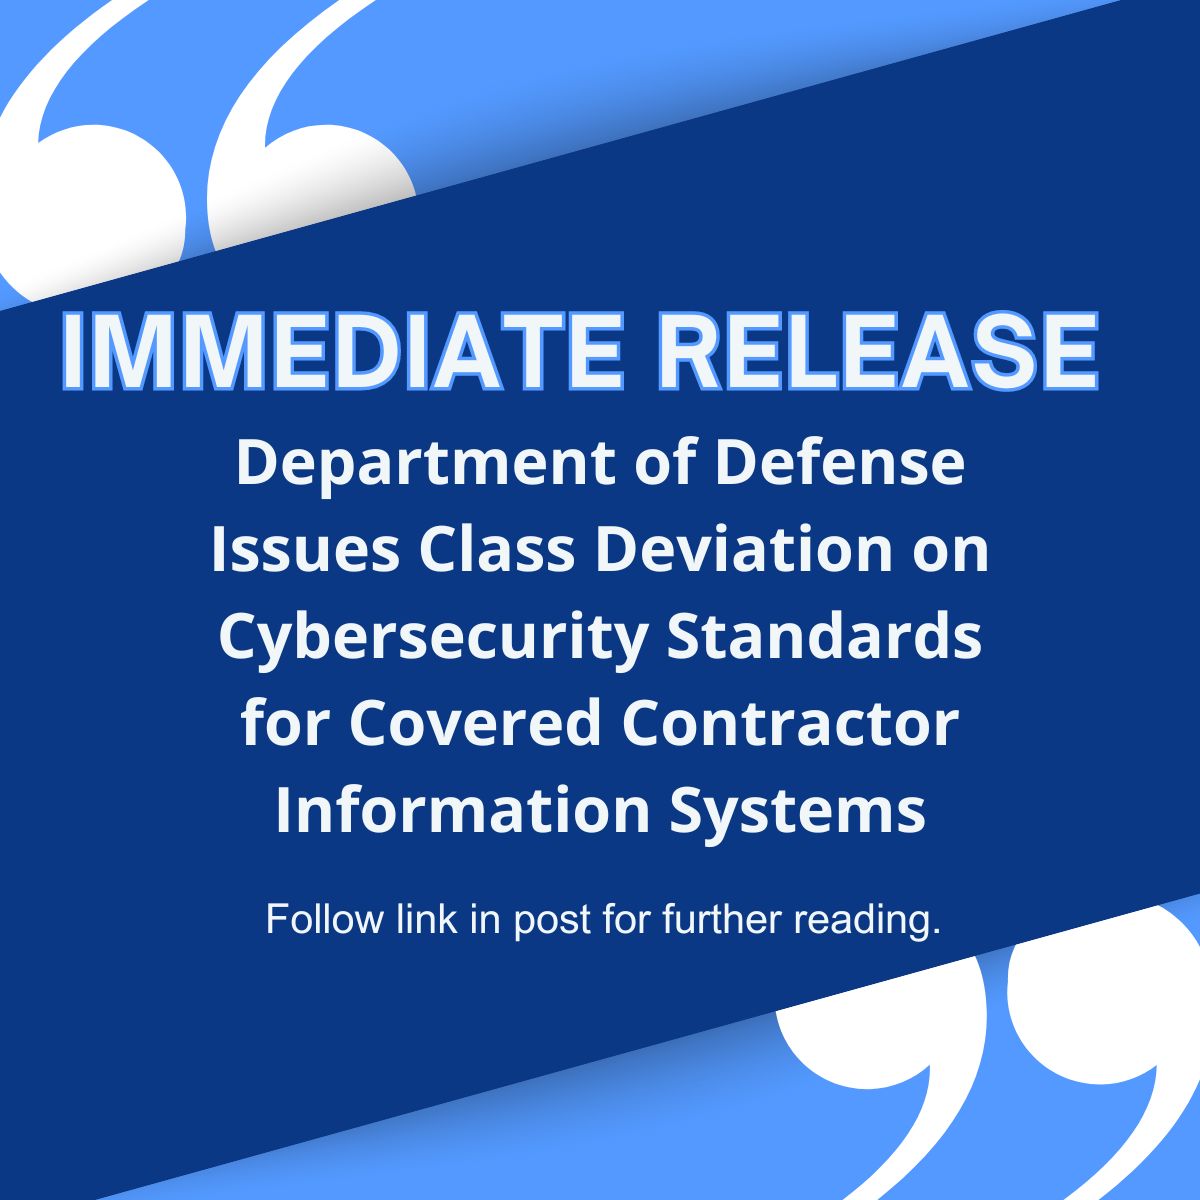 DoD issued a DFARS class deviation on May 2nd relating to NIST SP 800-171. It aims to provide industry more time to transition to the standards upon the Rev 3 release &amp; requires contractors subject to DFARS 7012 comply with NIST SP 800-171 Rev 2. https://t.co/0lI5ctR0XX https://t.co/l8zWeLDOsg